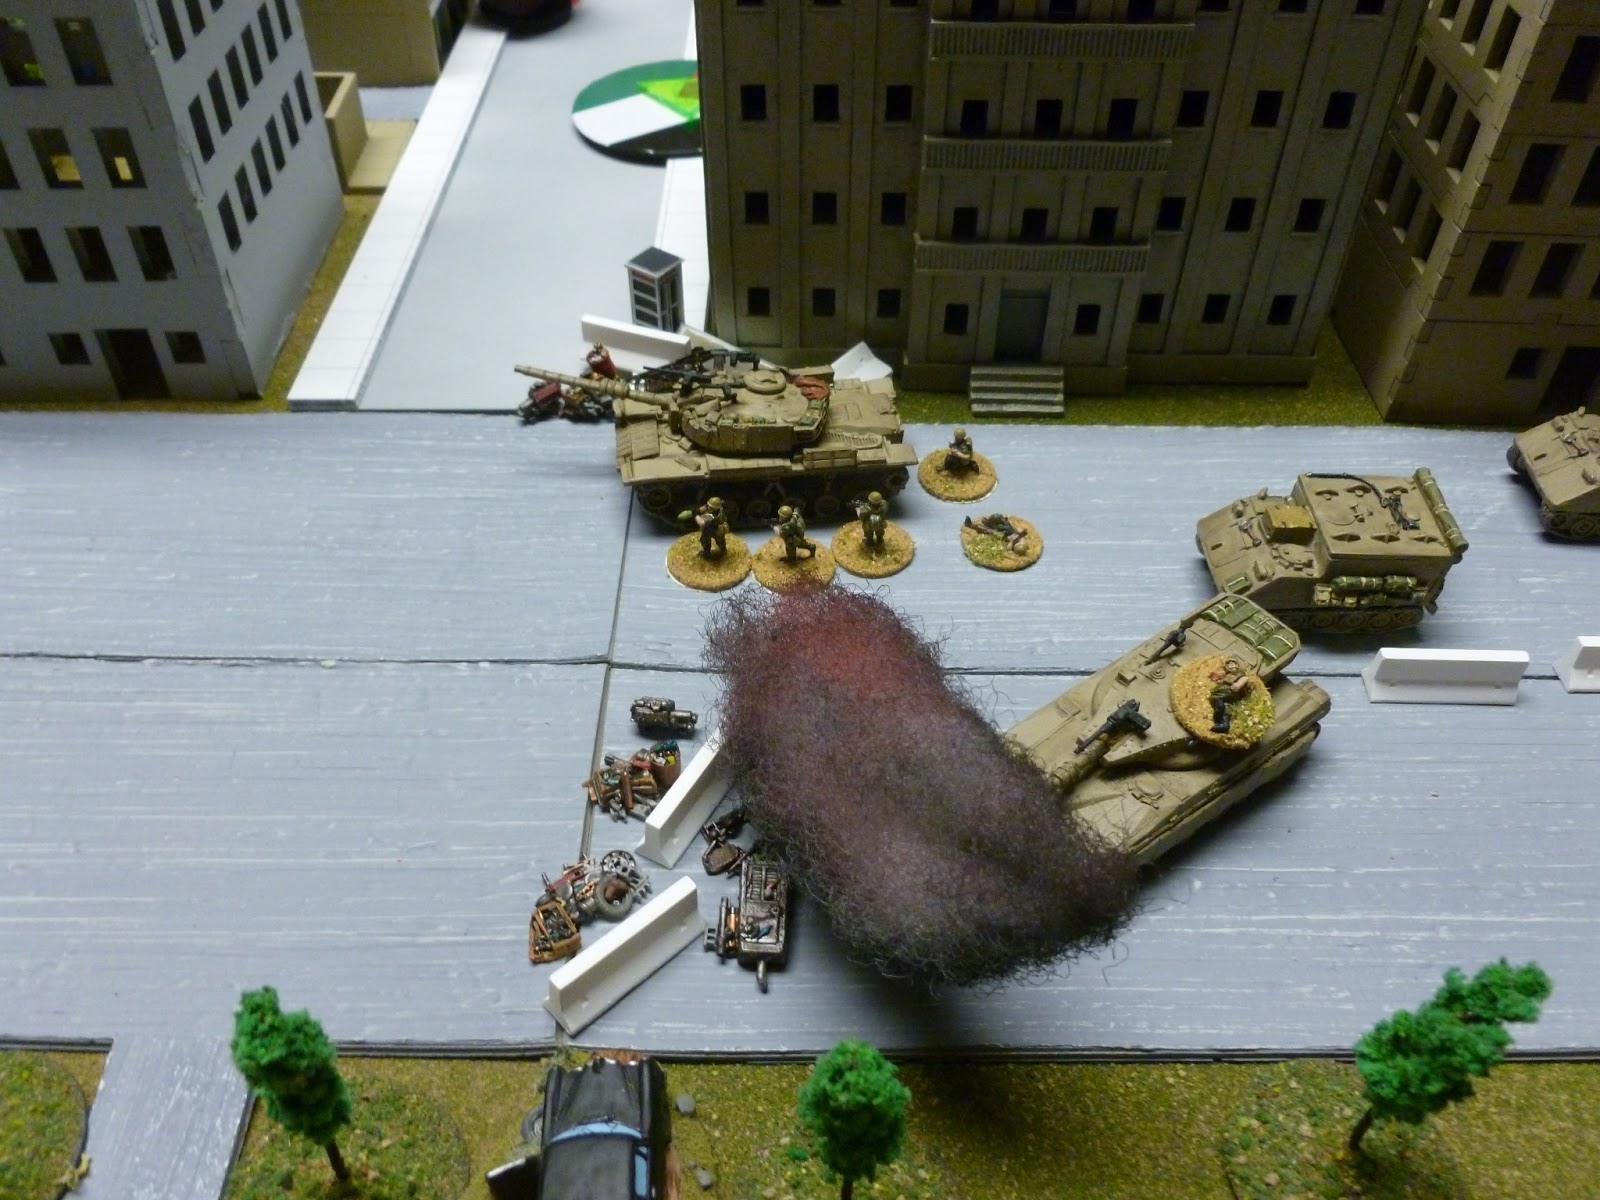  The Magach continues to fire on the T-34, guarded against RPGs by a squad of grunts. 